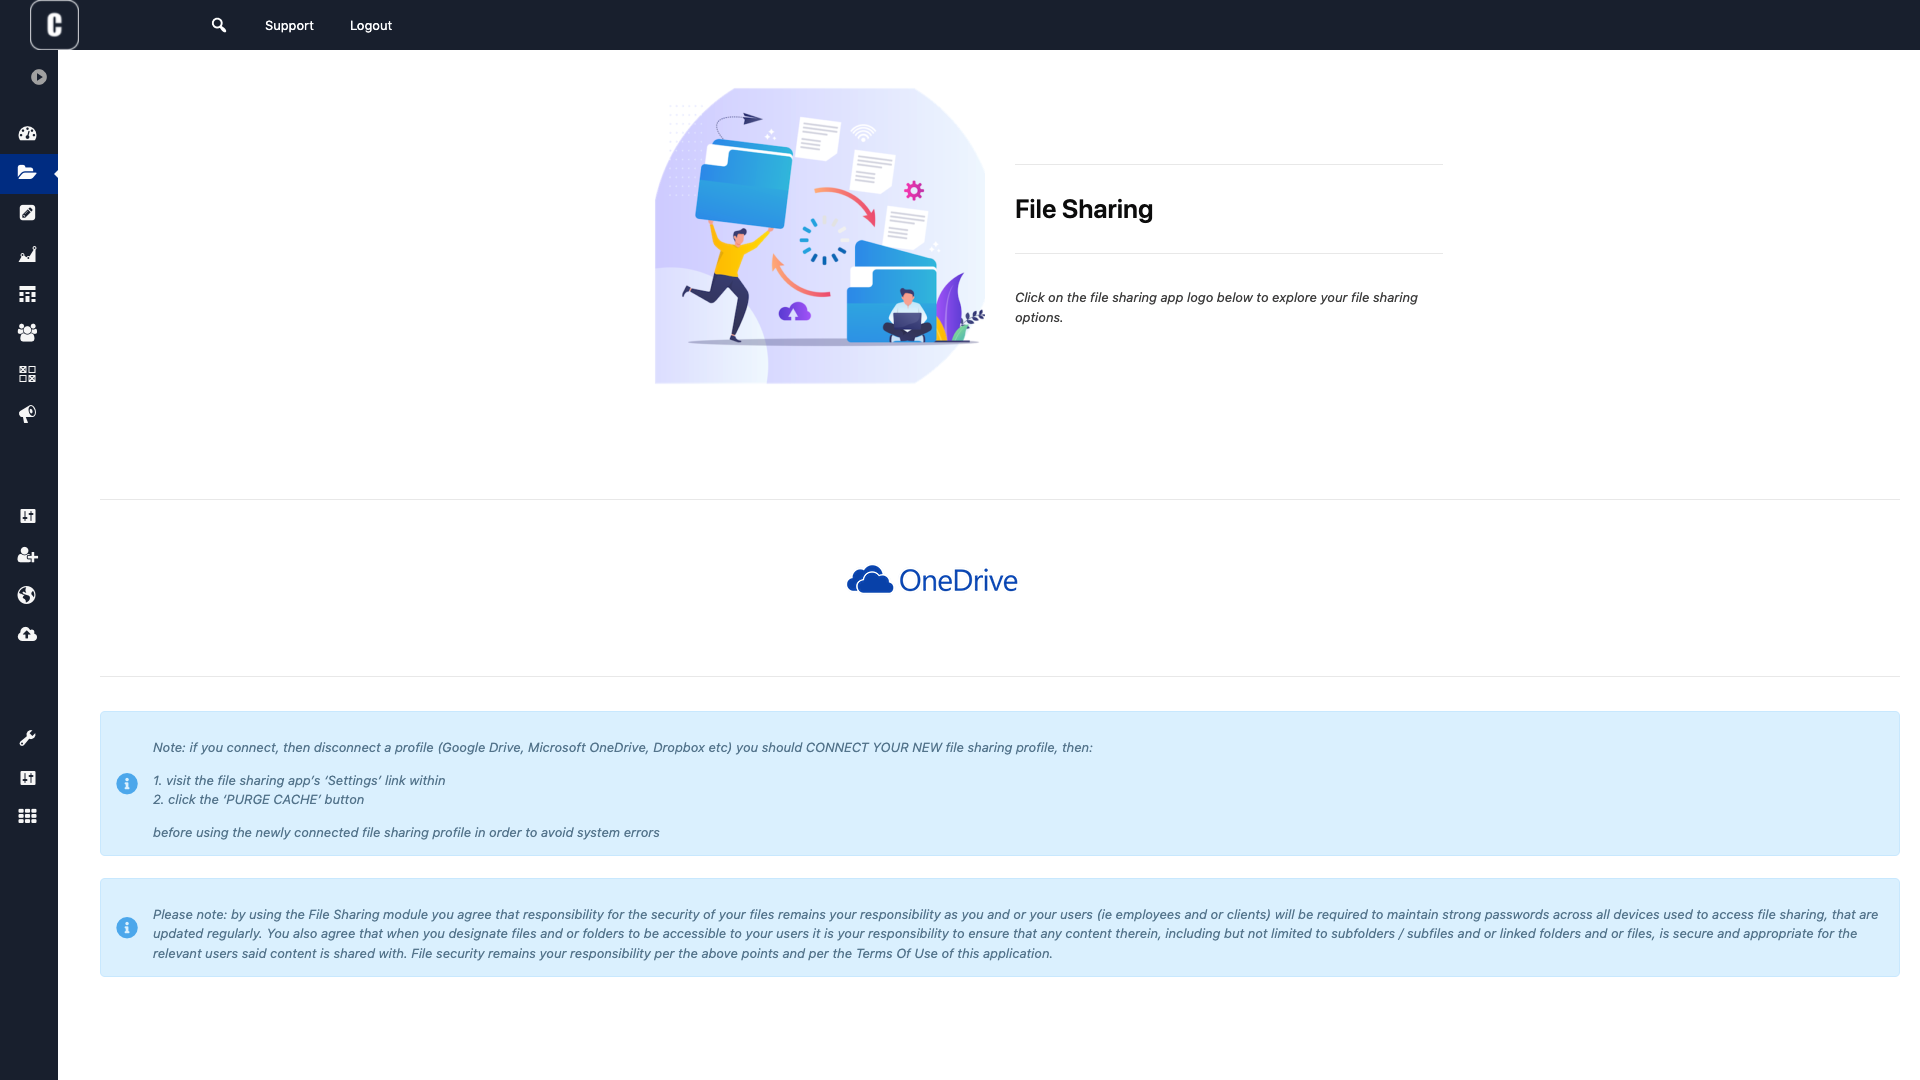 File Sharing - pre-existing integrations with Microsoft OneDrive, Google Drive, Dropbox and Box means you can set up your file sharing and give each of your clients their own Private Folder using your existing preferred work tools, in a few clicks